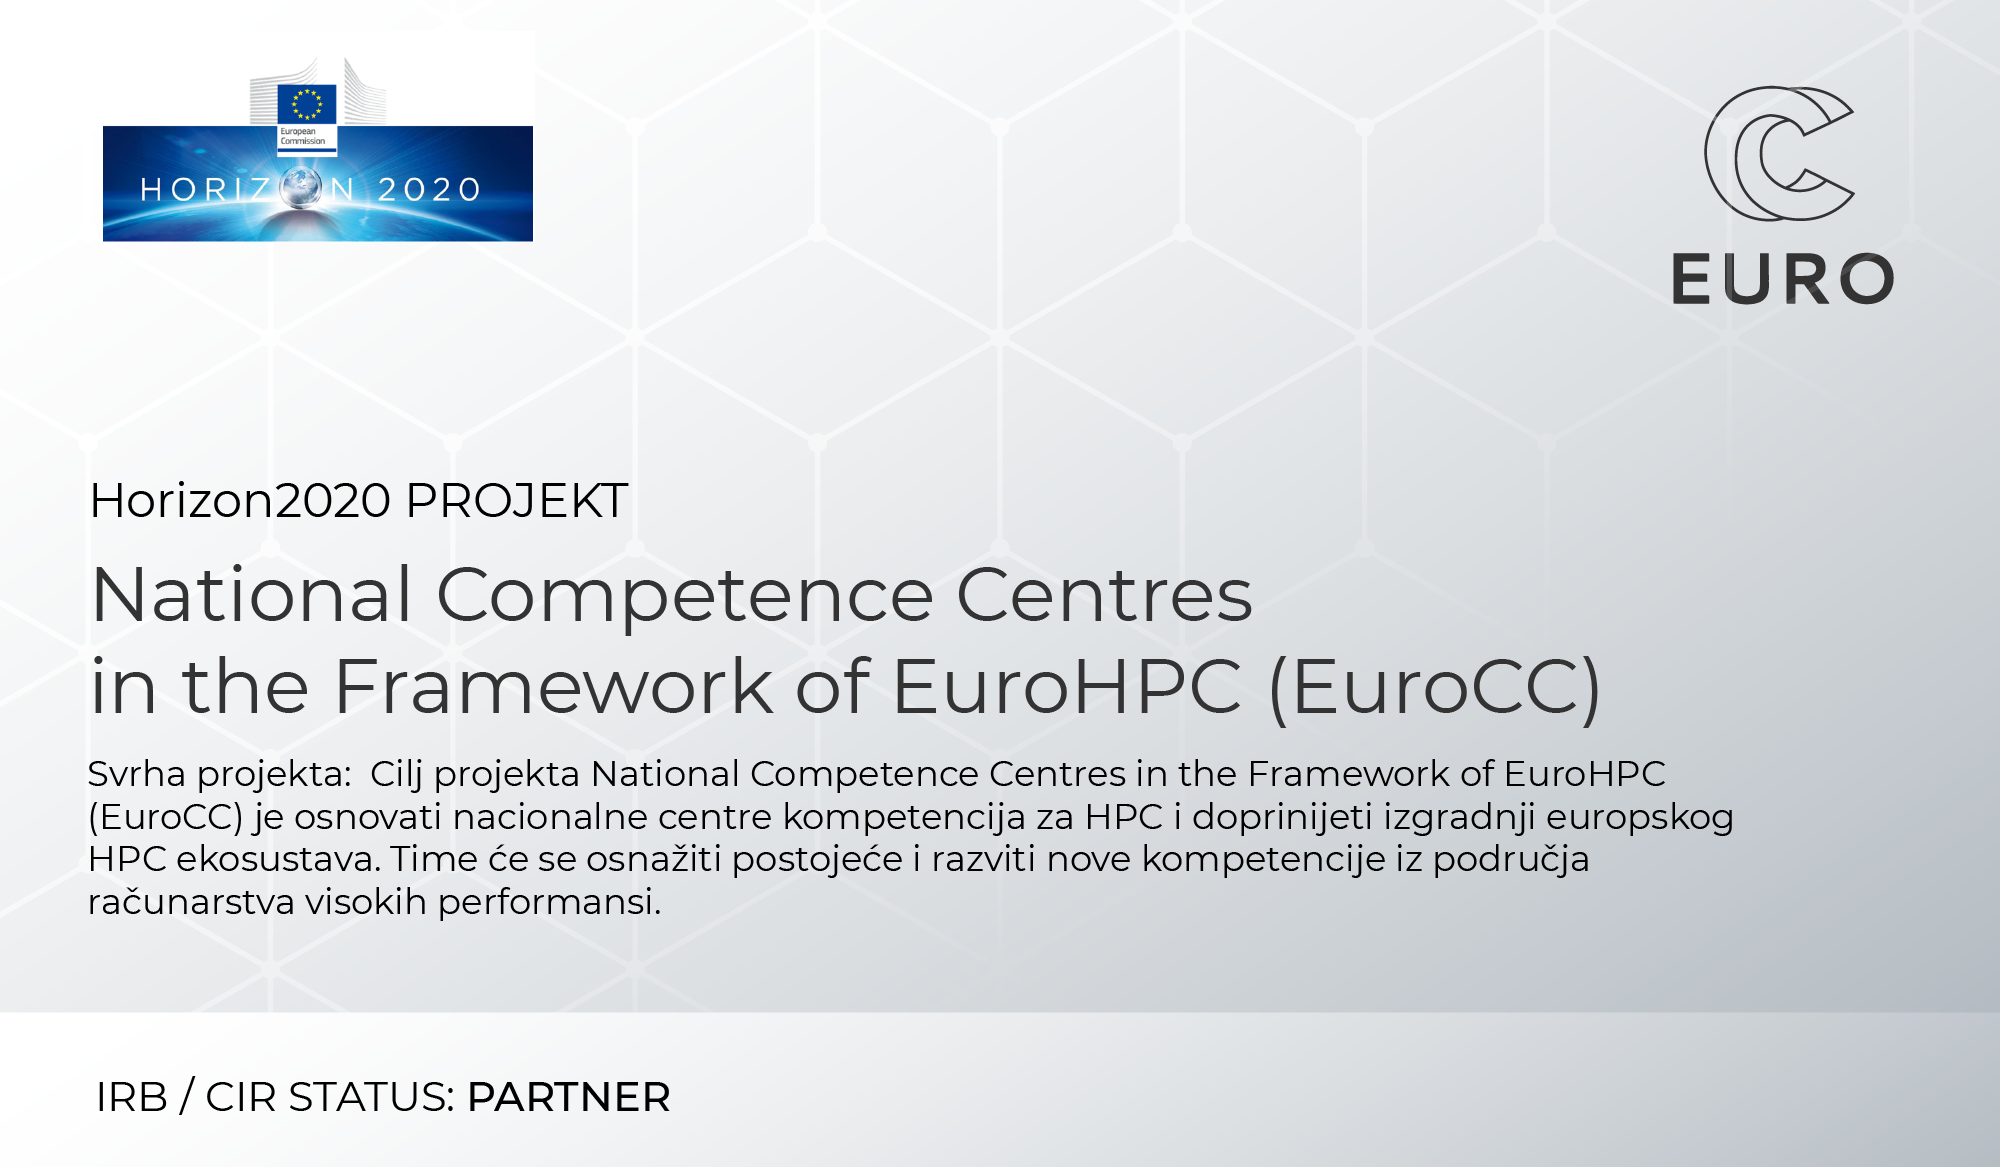 EuroCC - National Competence Centres in the Framework of EuroHPC